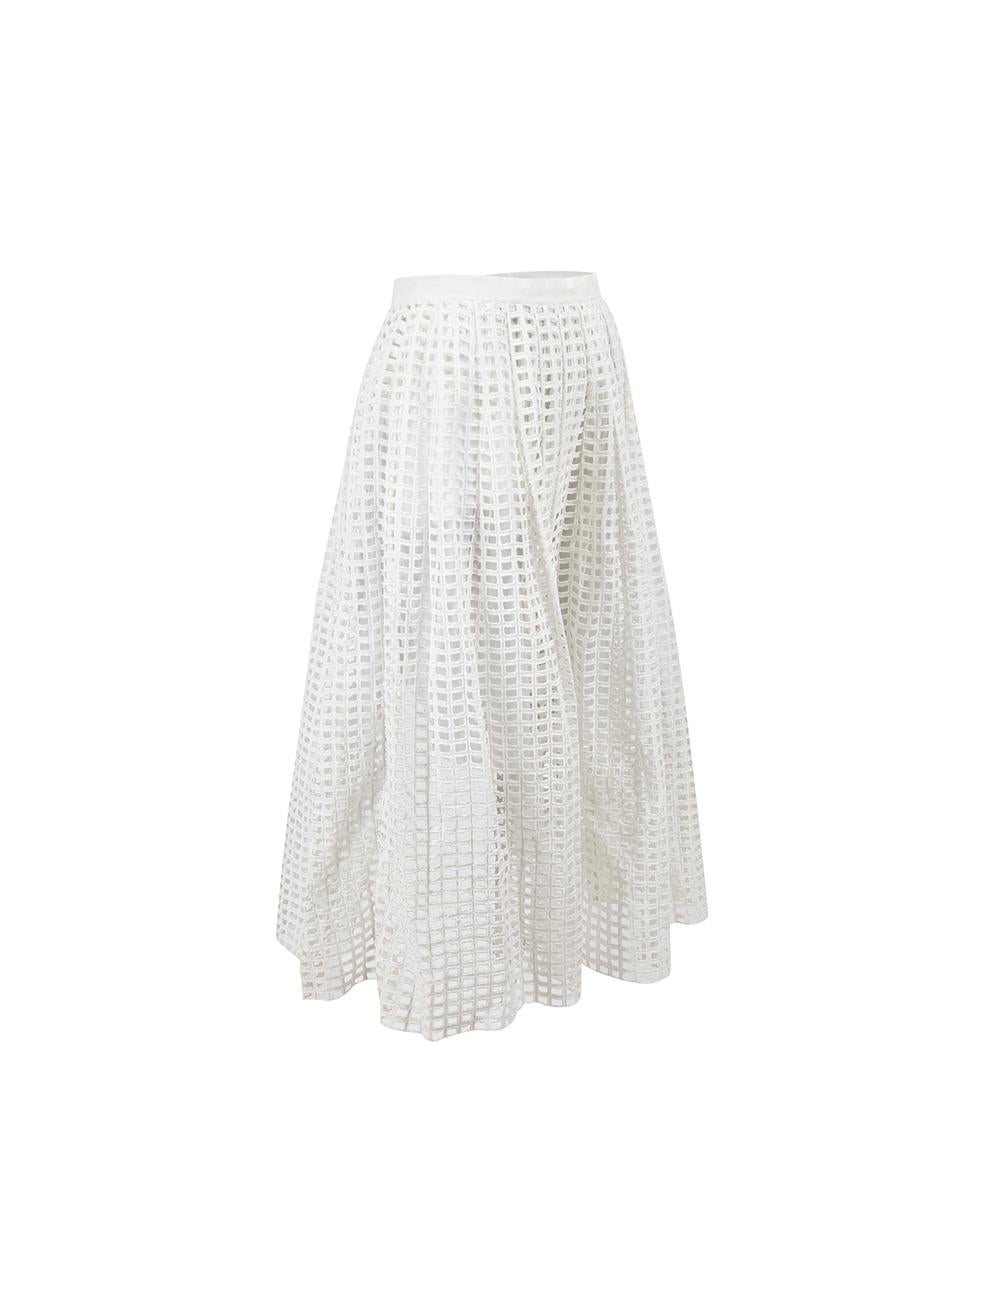 CONDITION is Very good. Minimal wear to skirt is evident. Minimal wear to outer layer with some loose embroidery threads to be found, particularly at the hem, on this used Carven designer resale item.



Details


White

Cotton

Skirt

Square laser